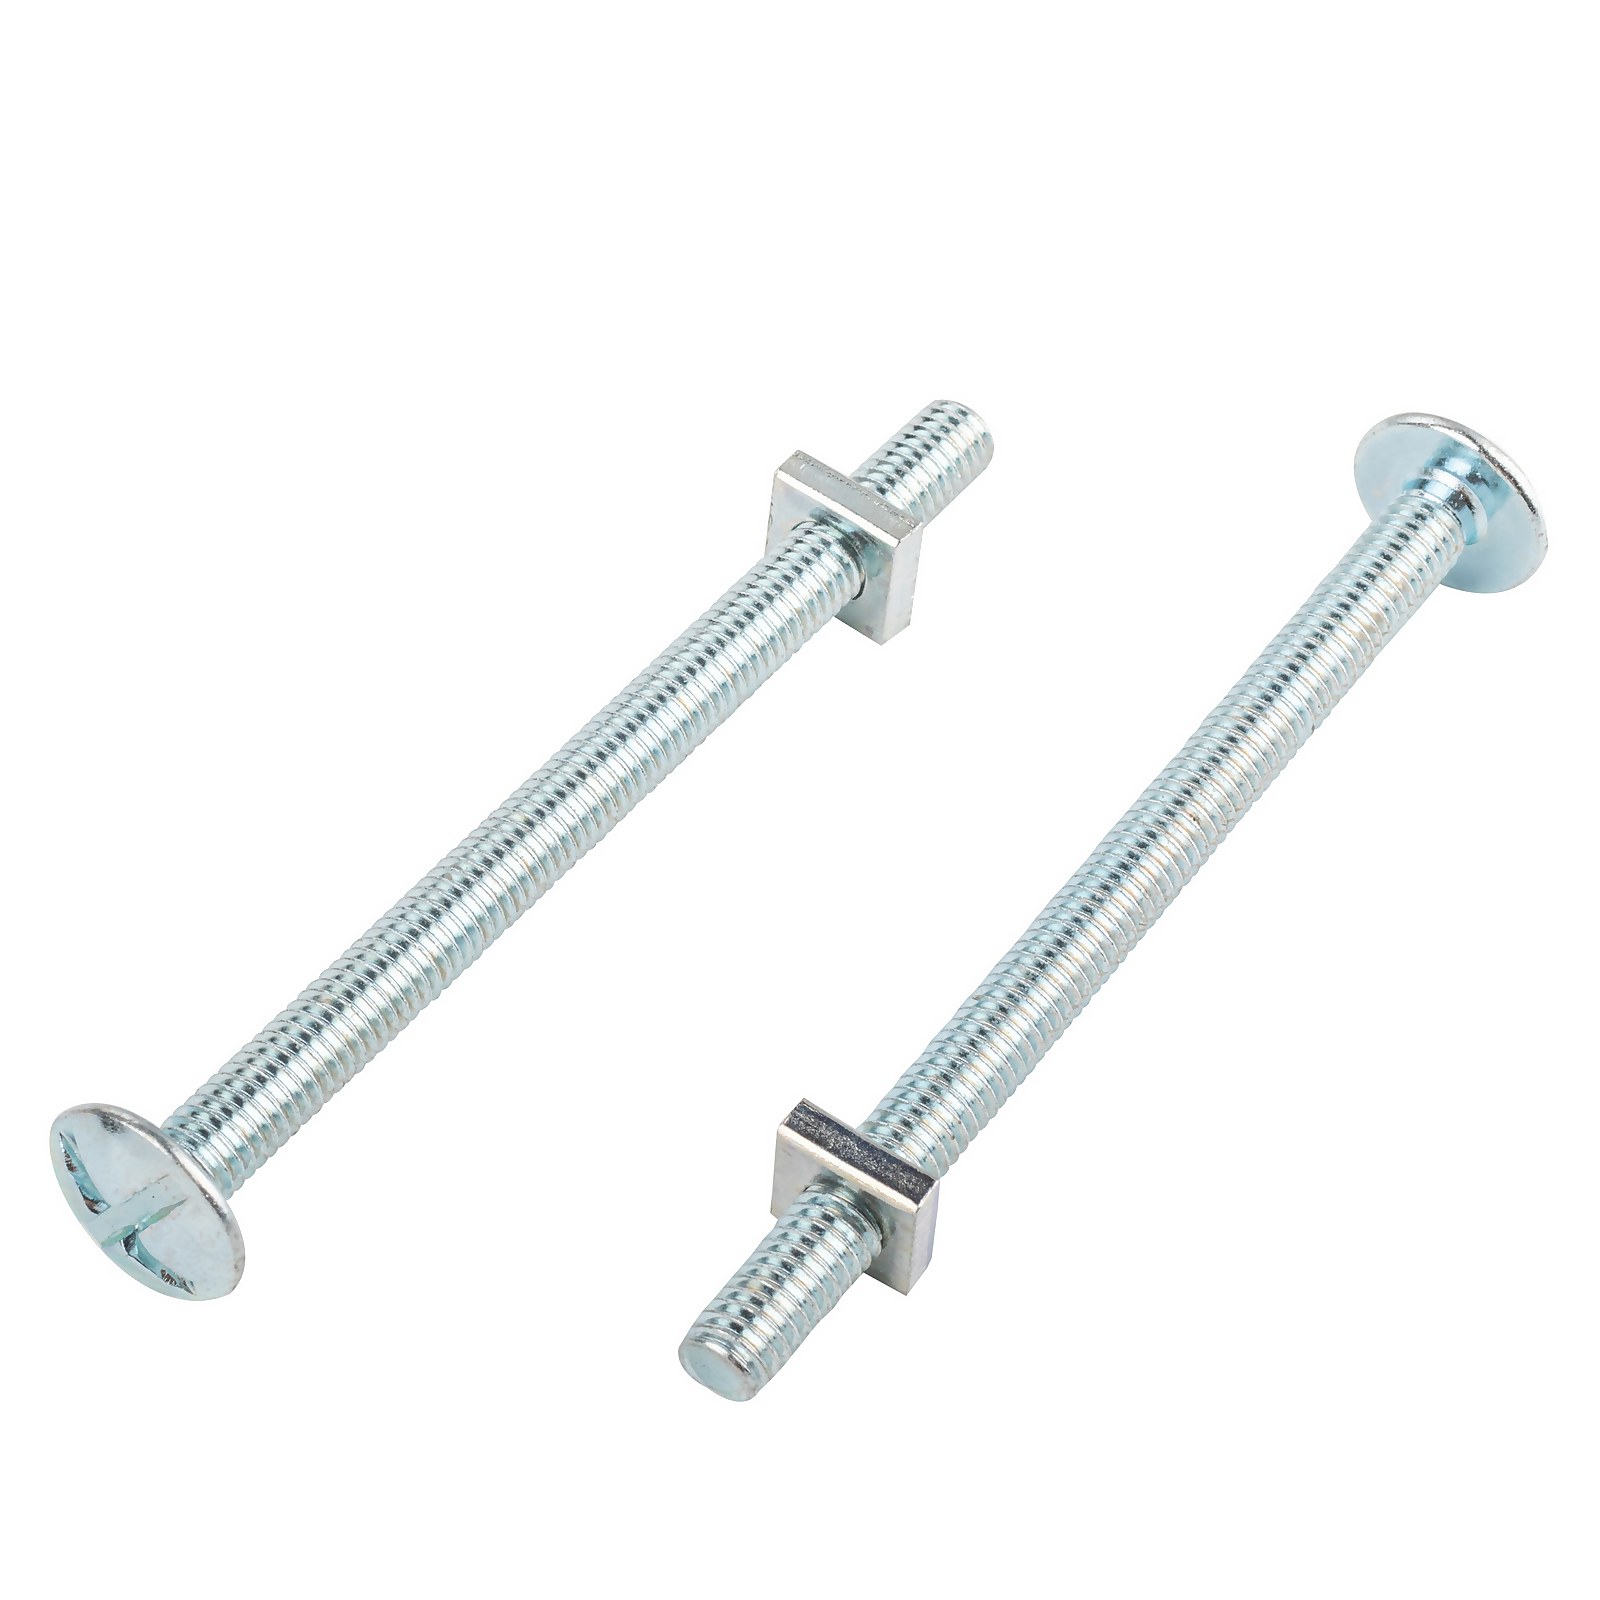 Photo of Homebase Zinc Plated Roof Bolt M6 80mm 5 Pack